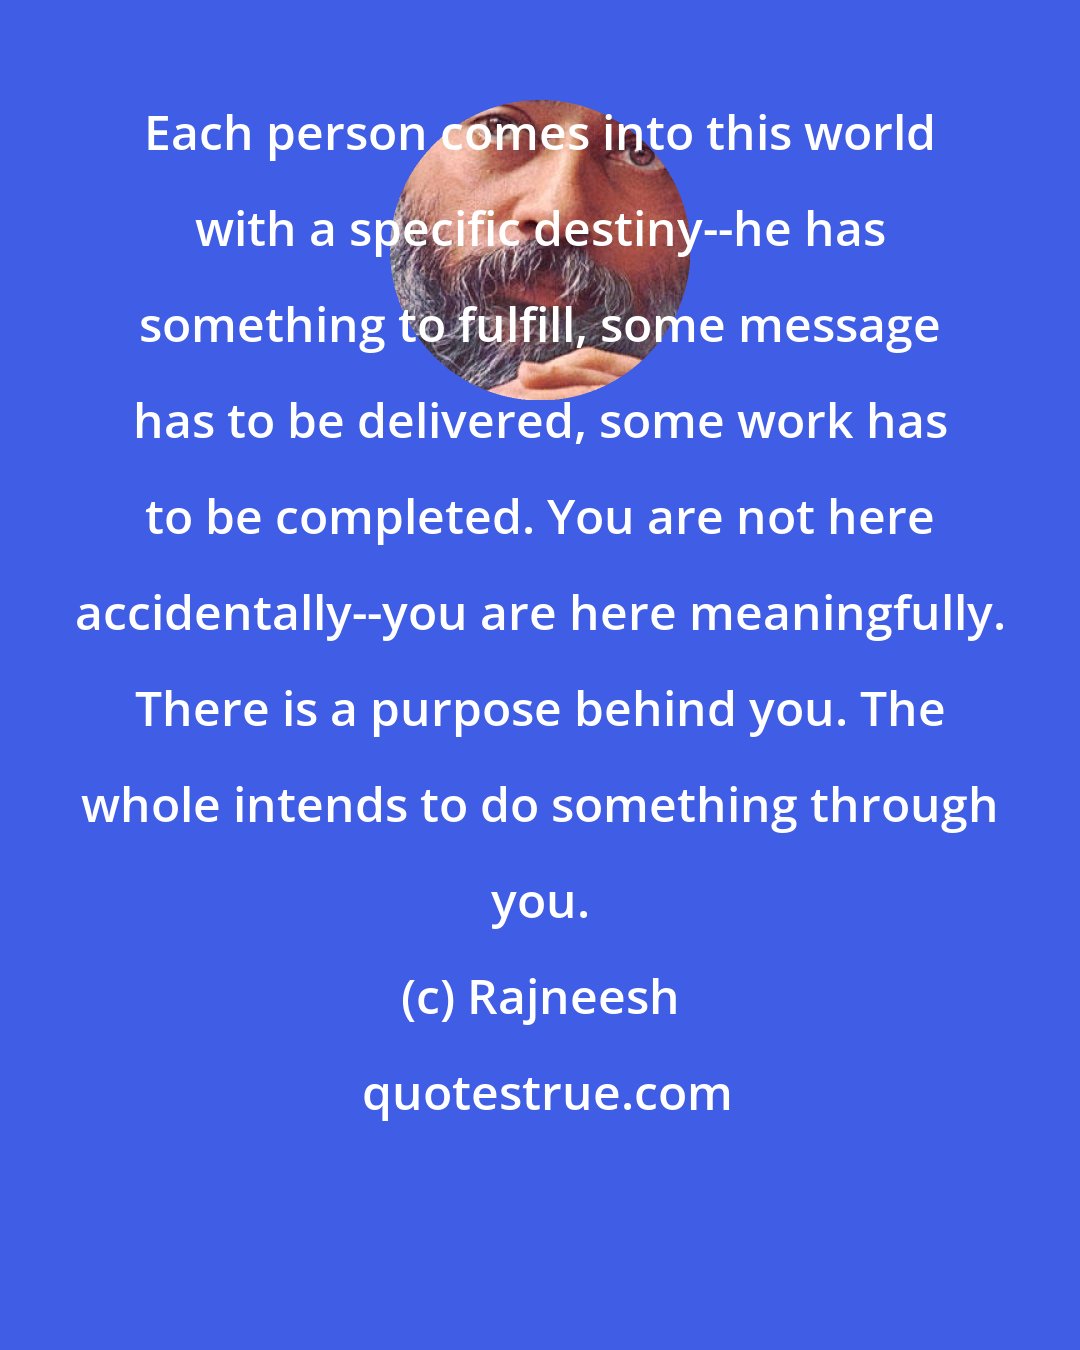 Rajneesh: Each person comes into this world with a specific destiny--he has something to fulfill, some message has to be delivered, some work has to be completed. You are not here accidentally--you are here meaningfully. There is a purpose behind you. The whole intends to do something through you.